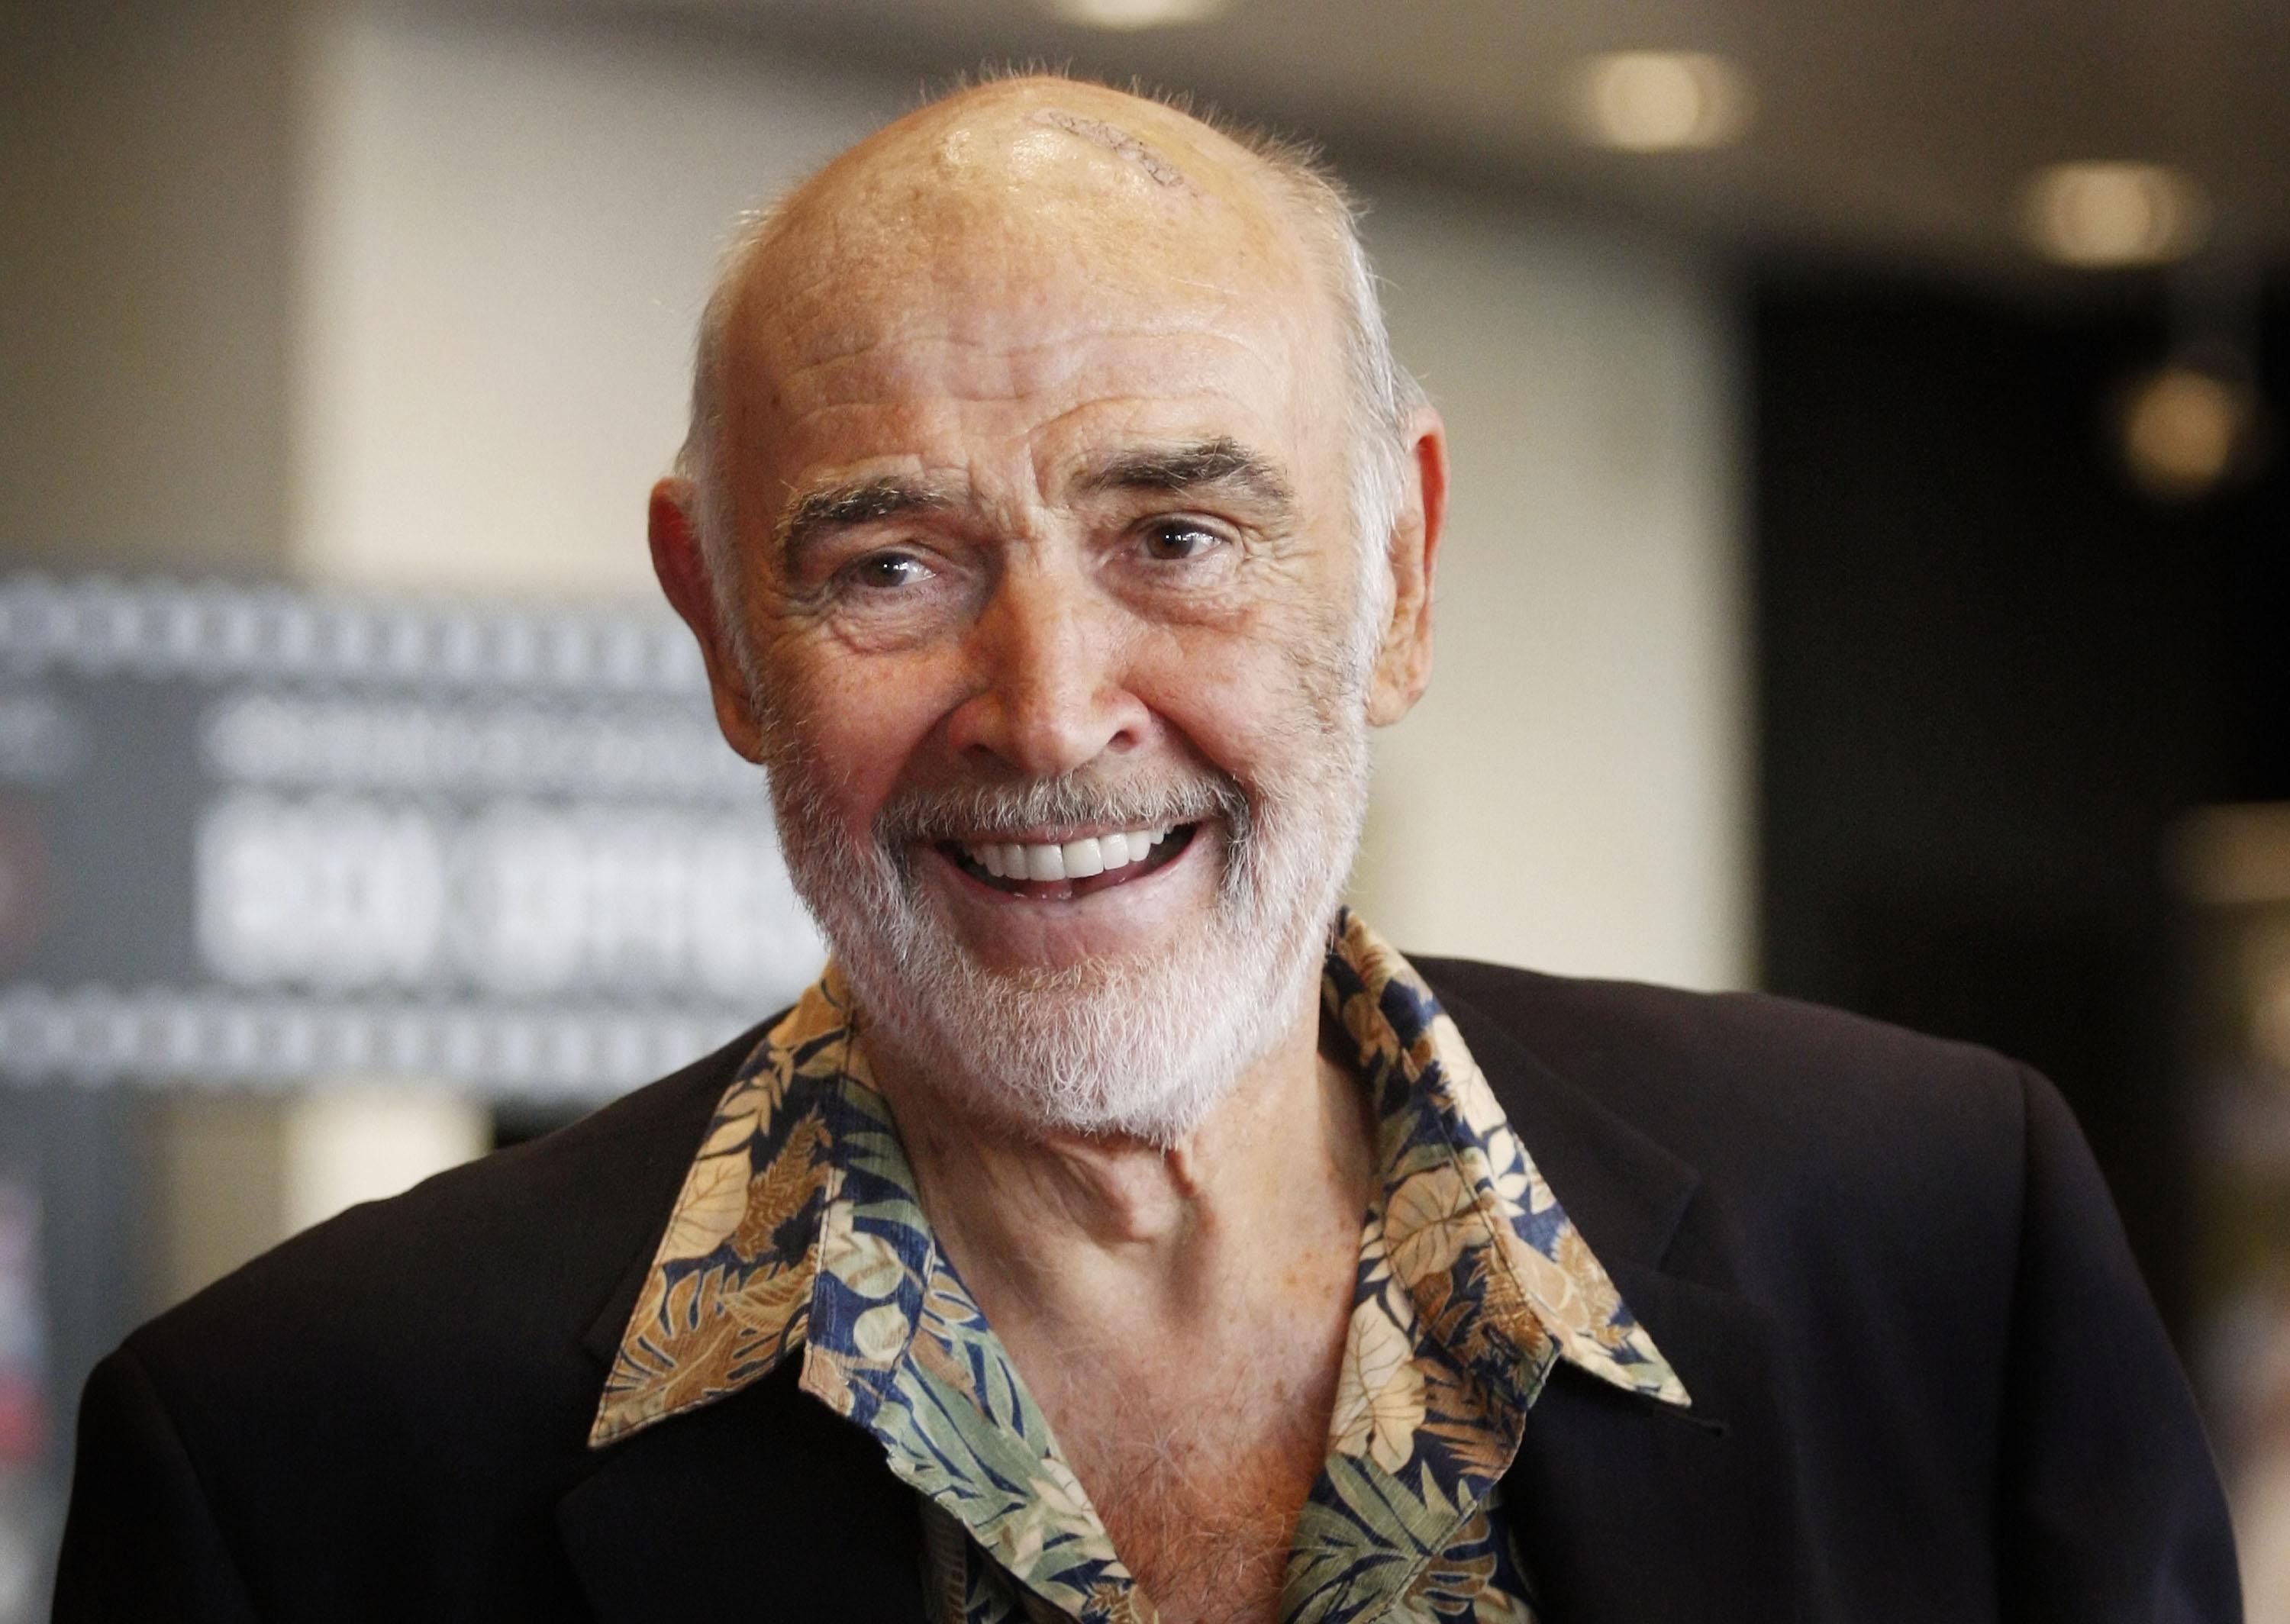 Sir Sean Connery ahead of a screening of his old 1975 classic movie "The Man Who Would be King", part of the Edinburgh International Film Festival on June 20, 2010. | Photo: Getty Images